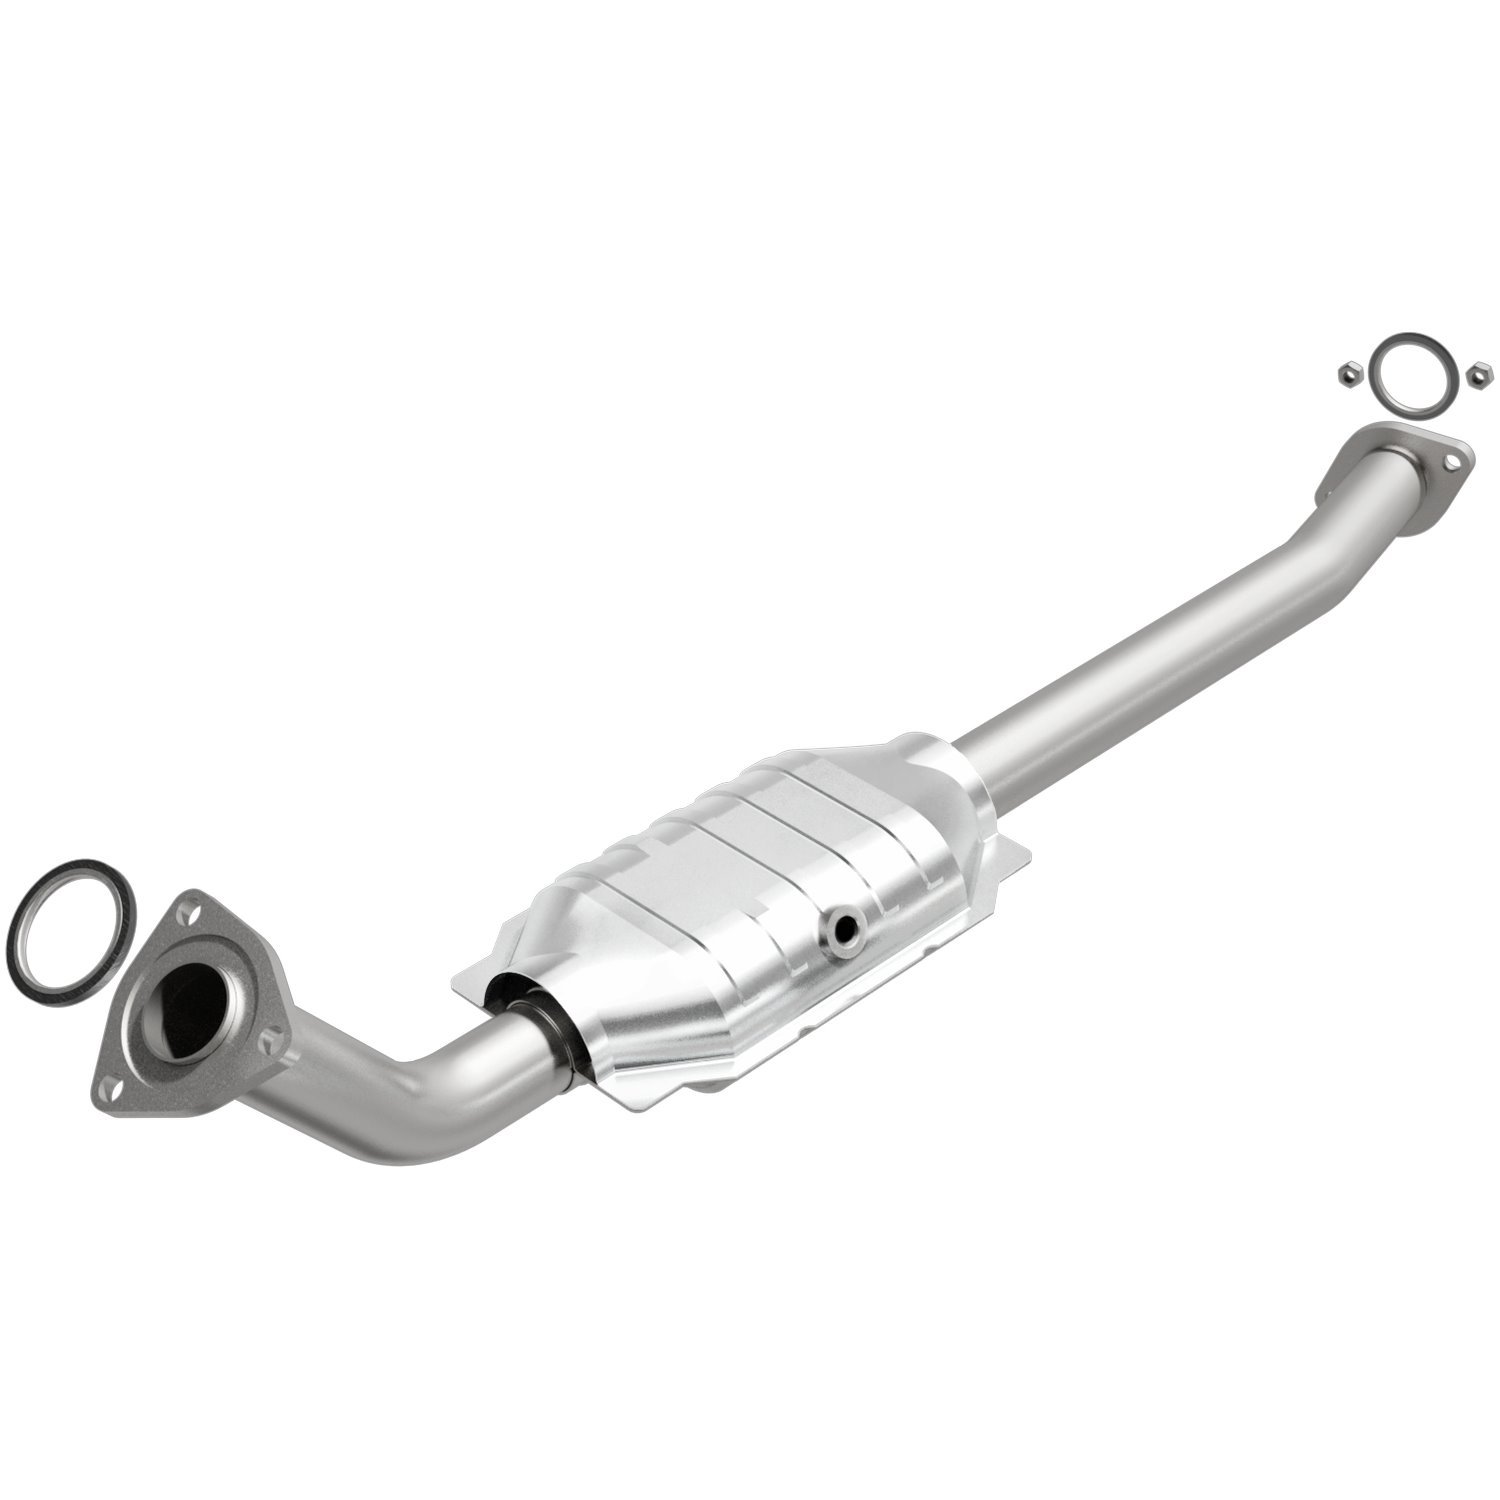 2005-2007 Toyota Sequoia HM Grade Federal / EPA Compliant Direct-Fit Catalytic Converter